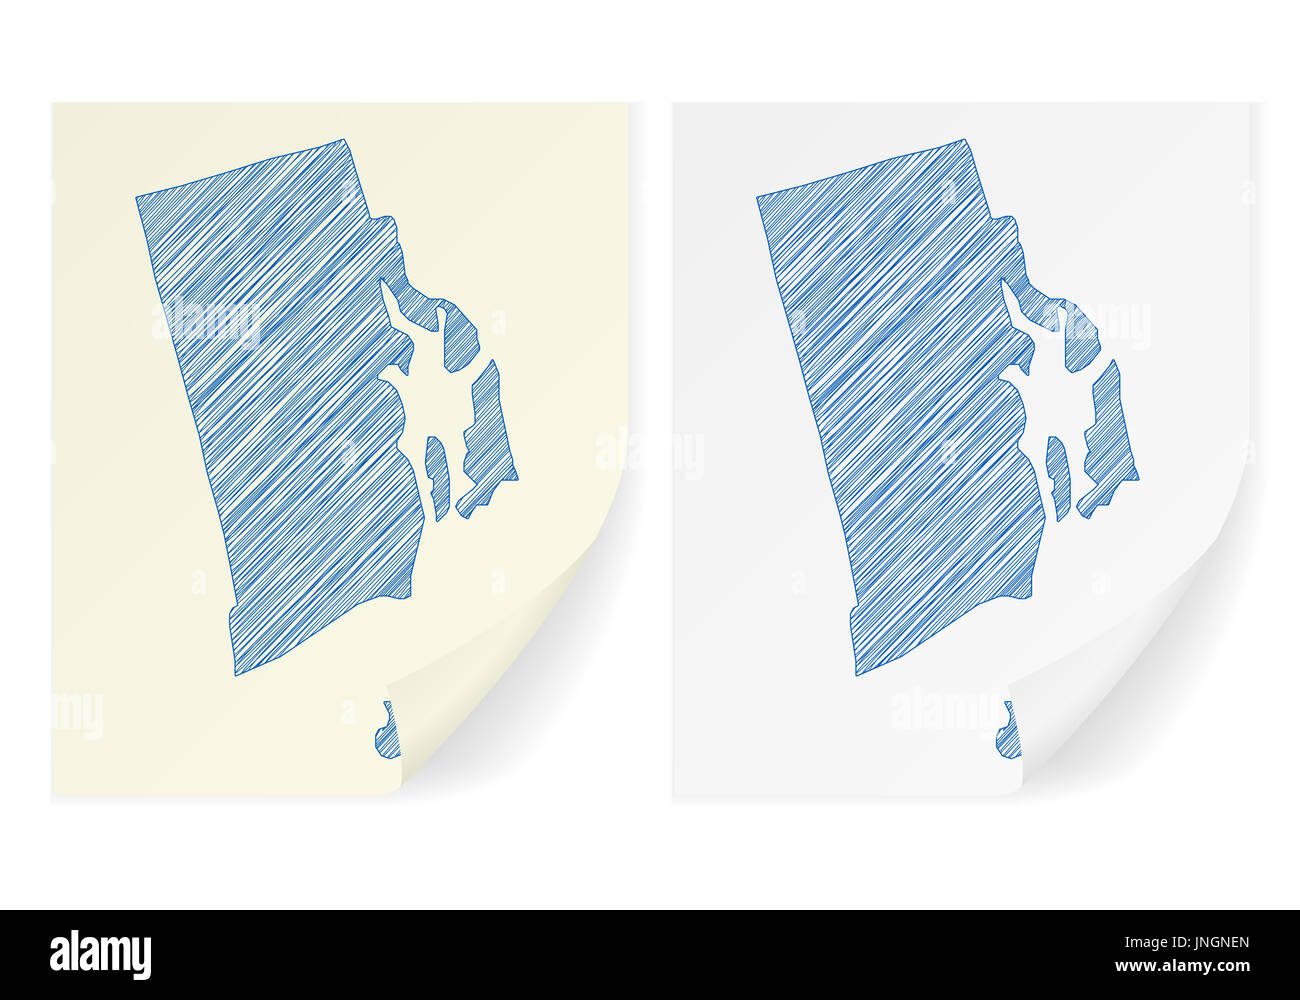 Rhode island scribble map on a white background. Stock Photo